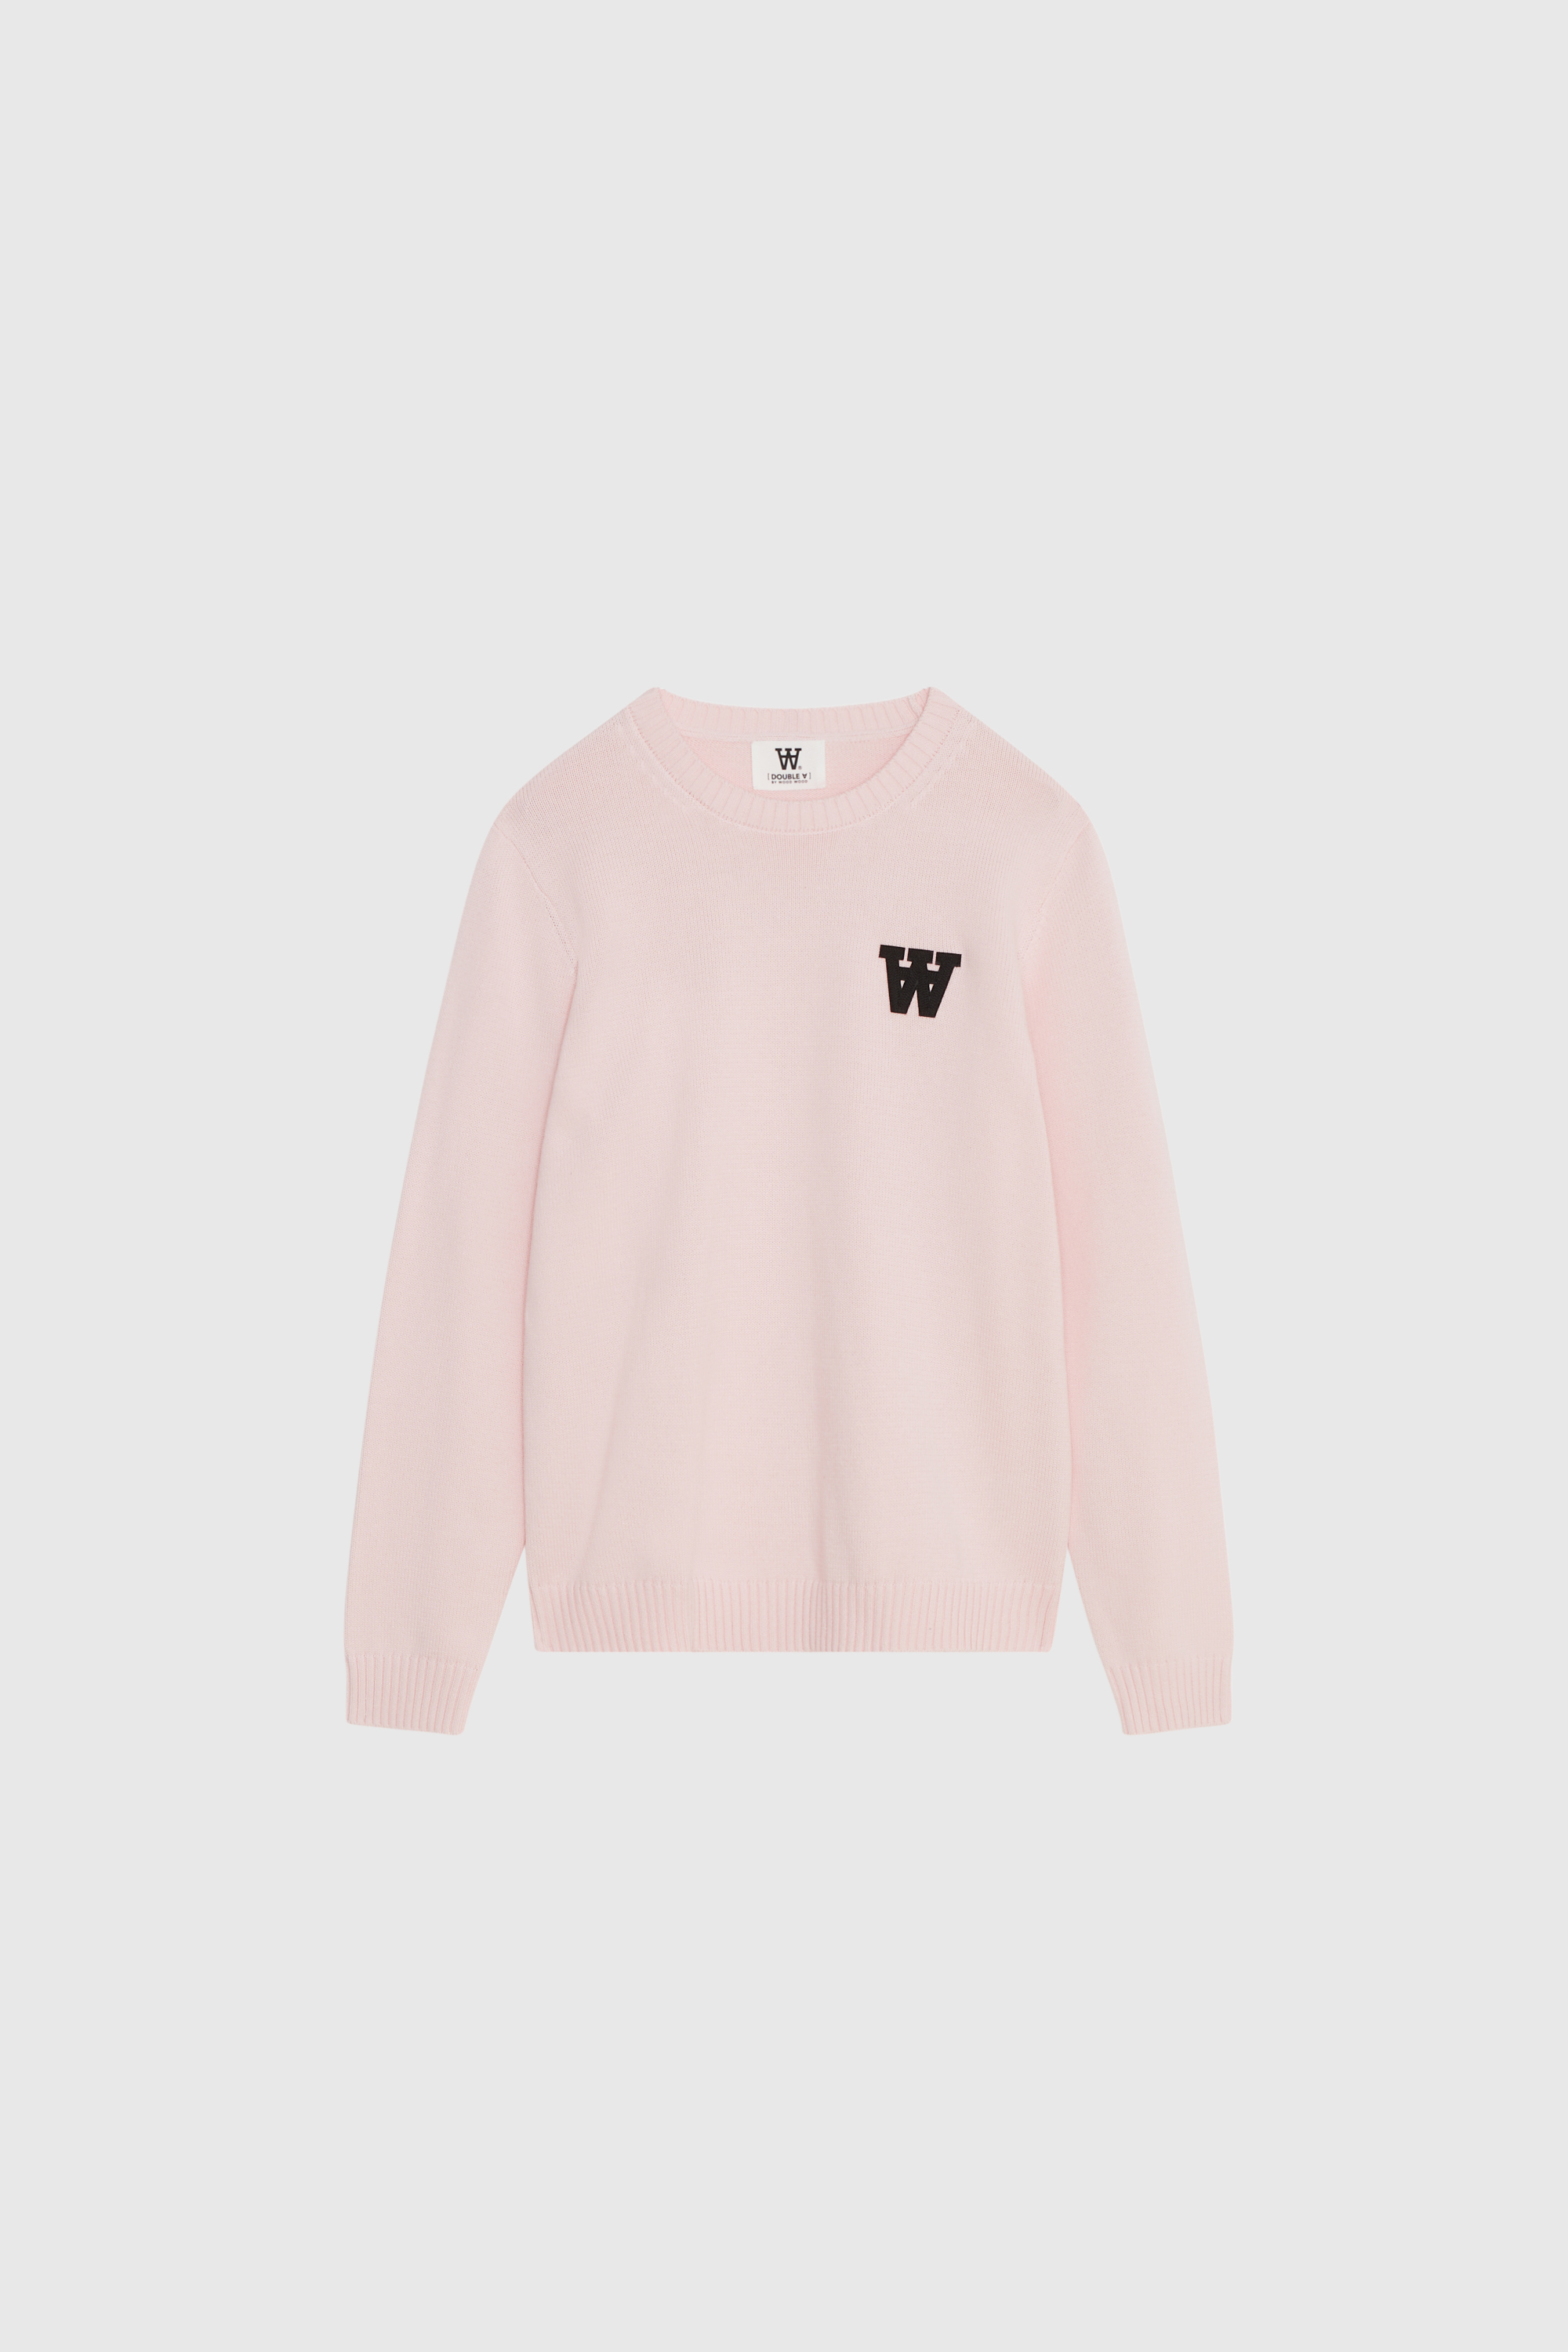 Double A by Wood Wood Tay AA CS Patch Jumper Pale pink | WoodWood.com